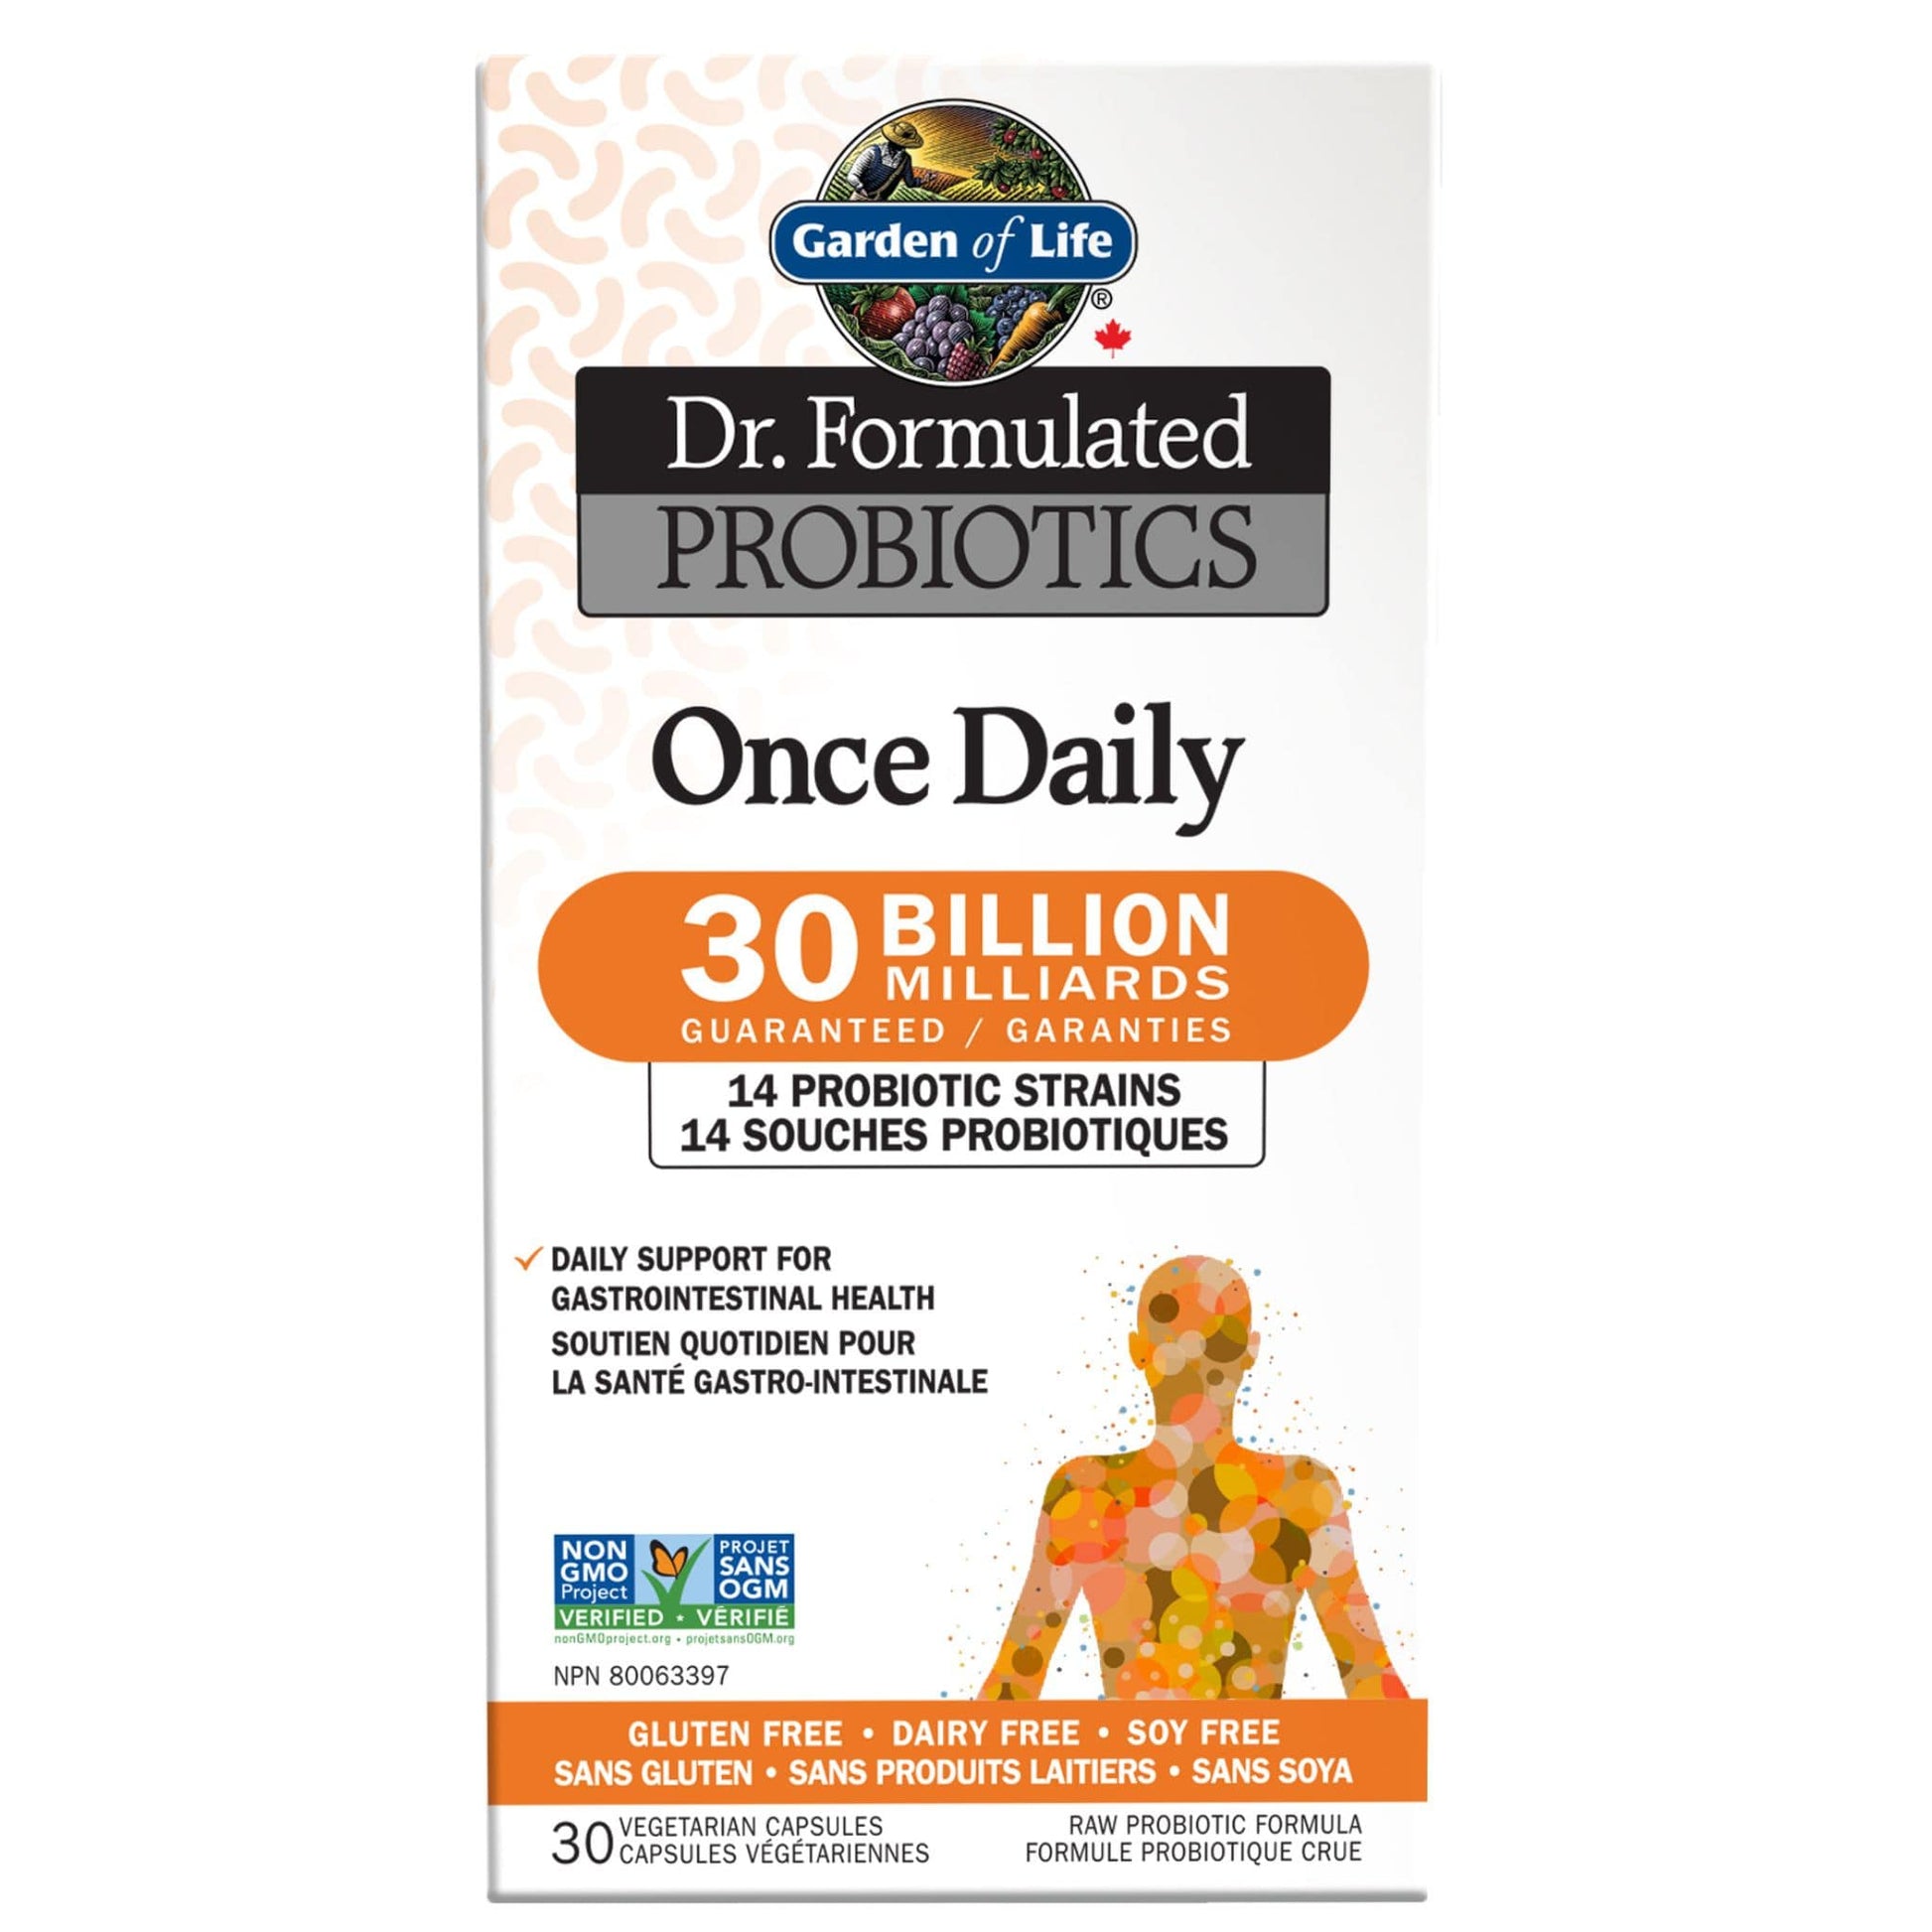 Refrigerated | Garden of Life Dr. Formulated Probiotics Once Daily